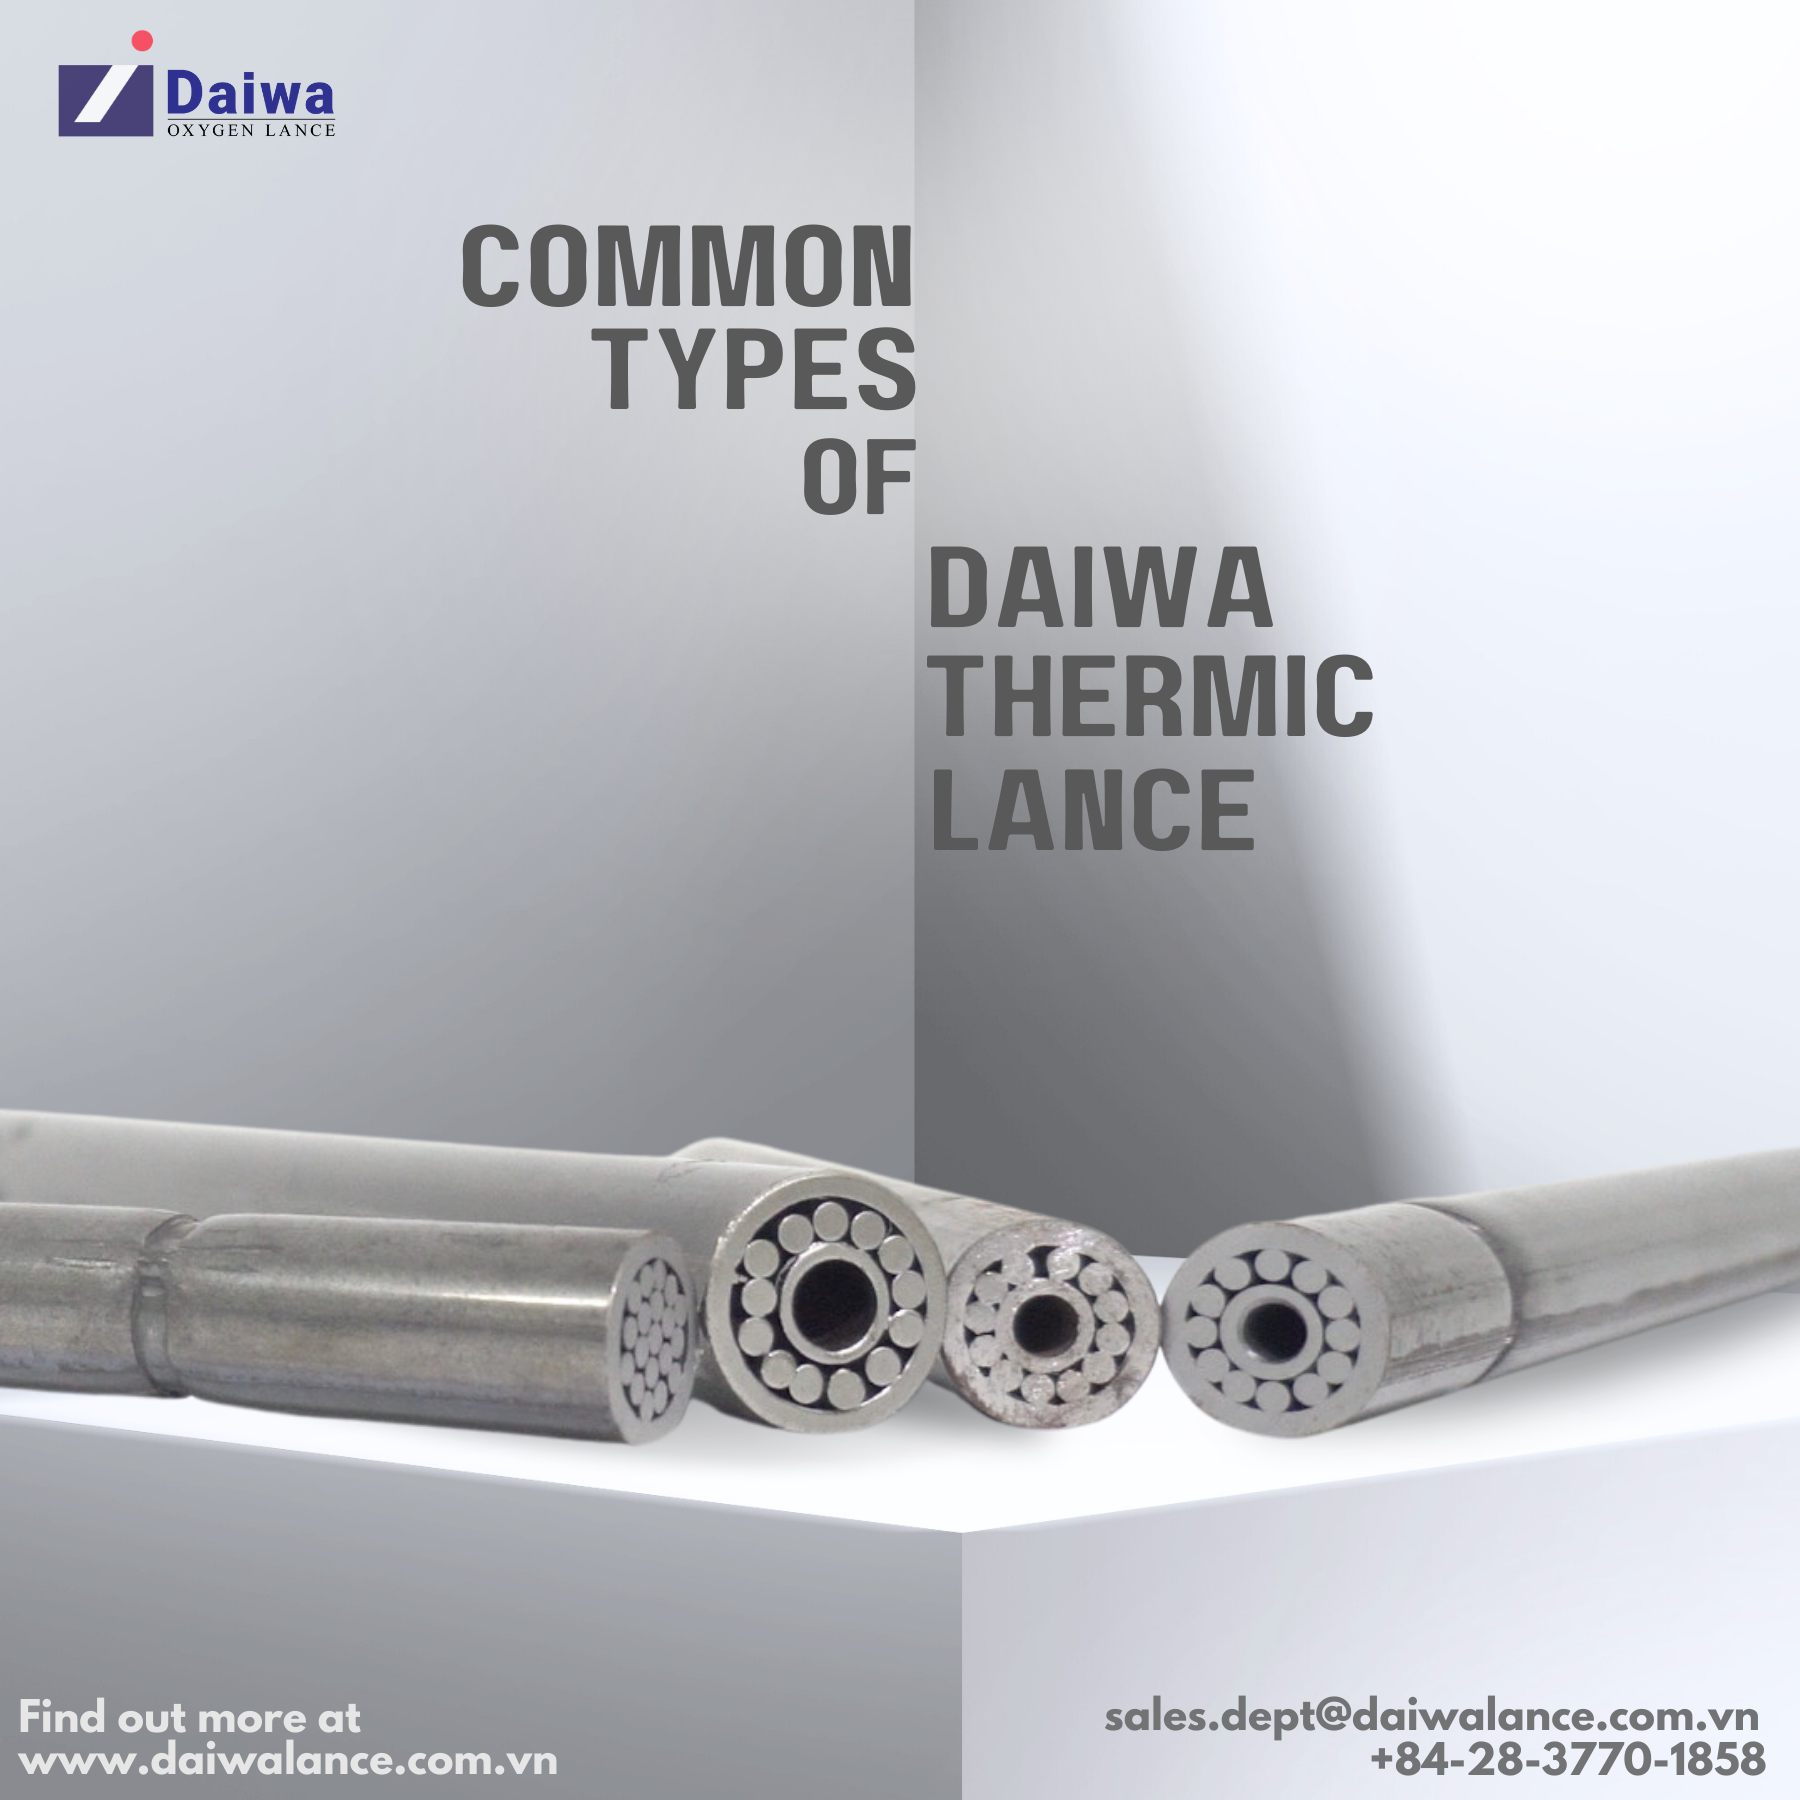 Common Types of Daiwa Thermic Lance